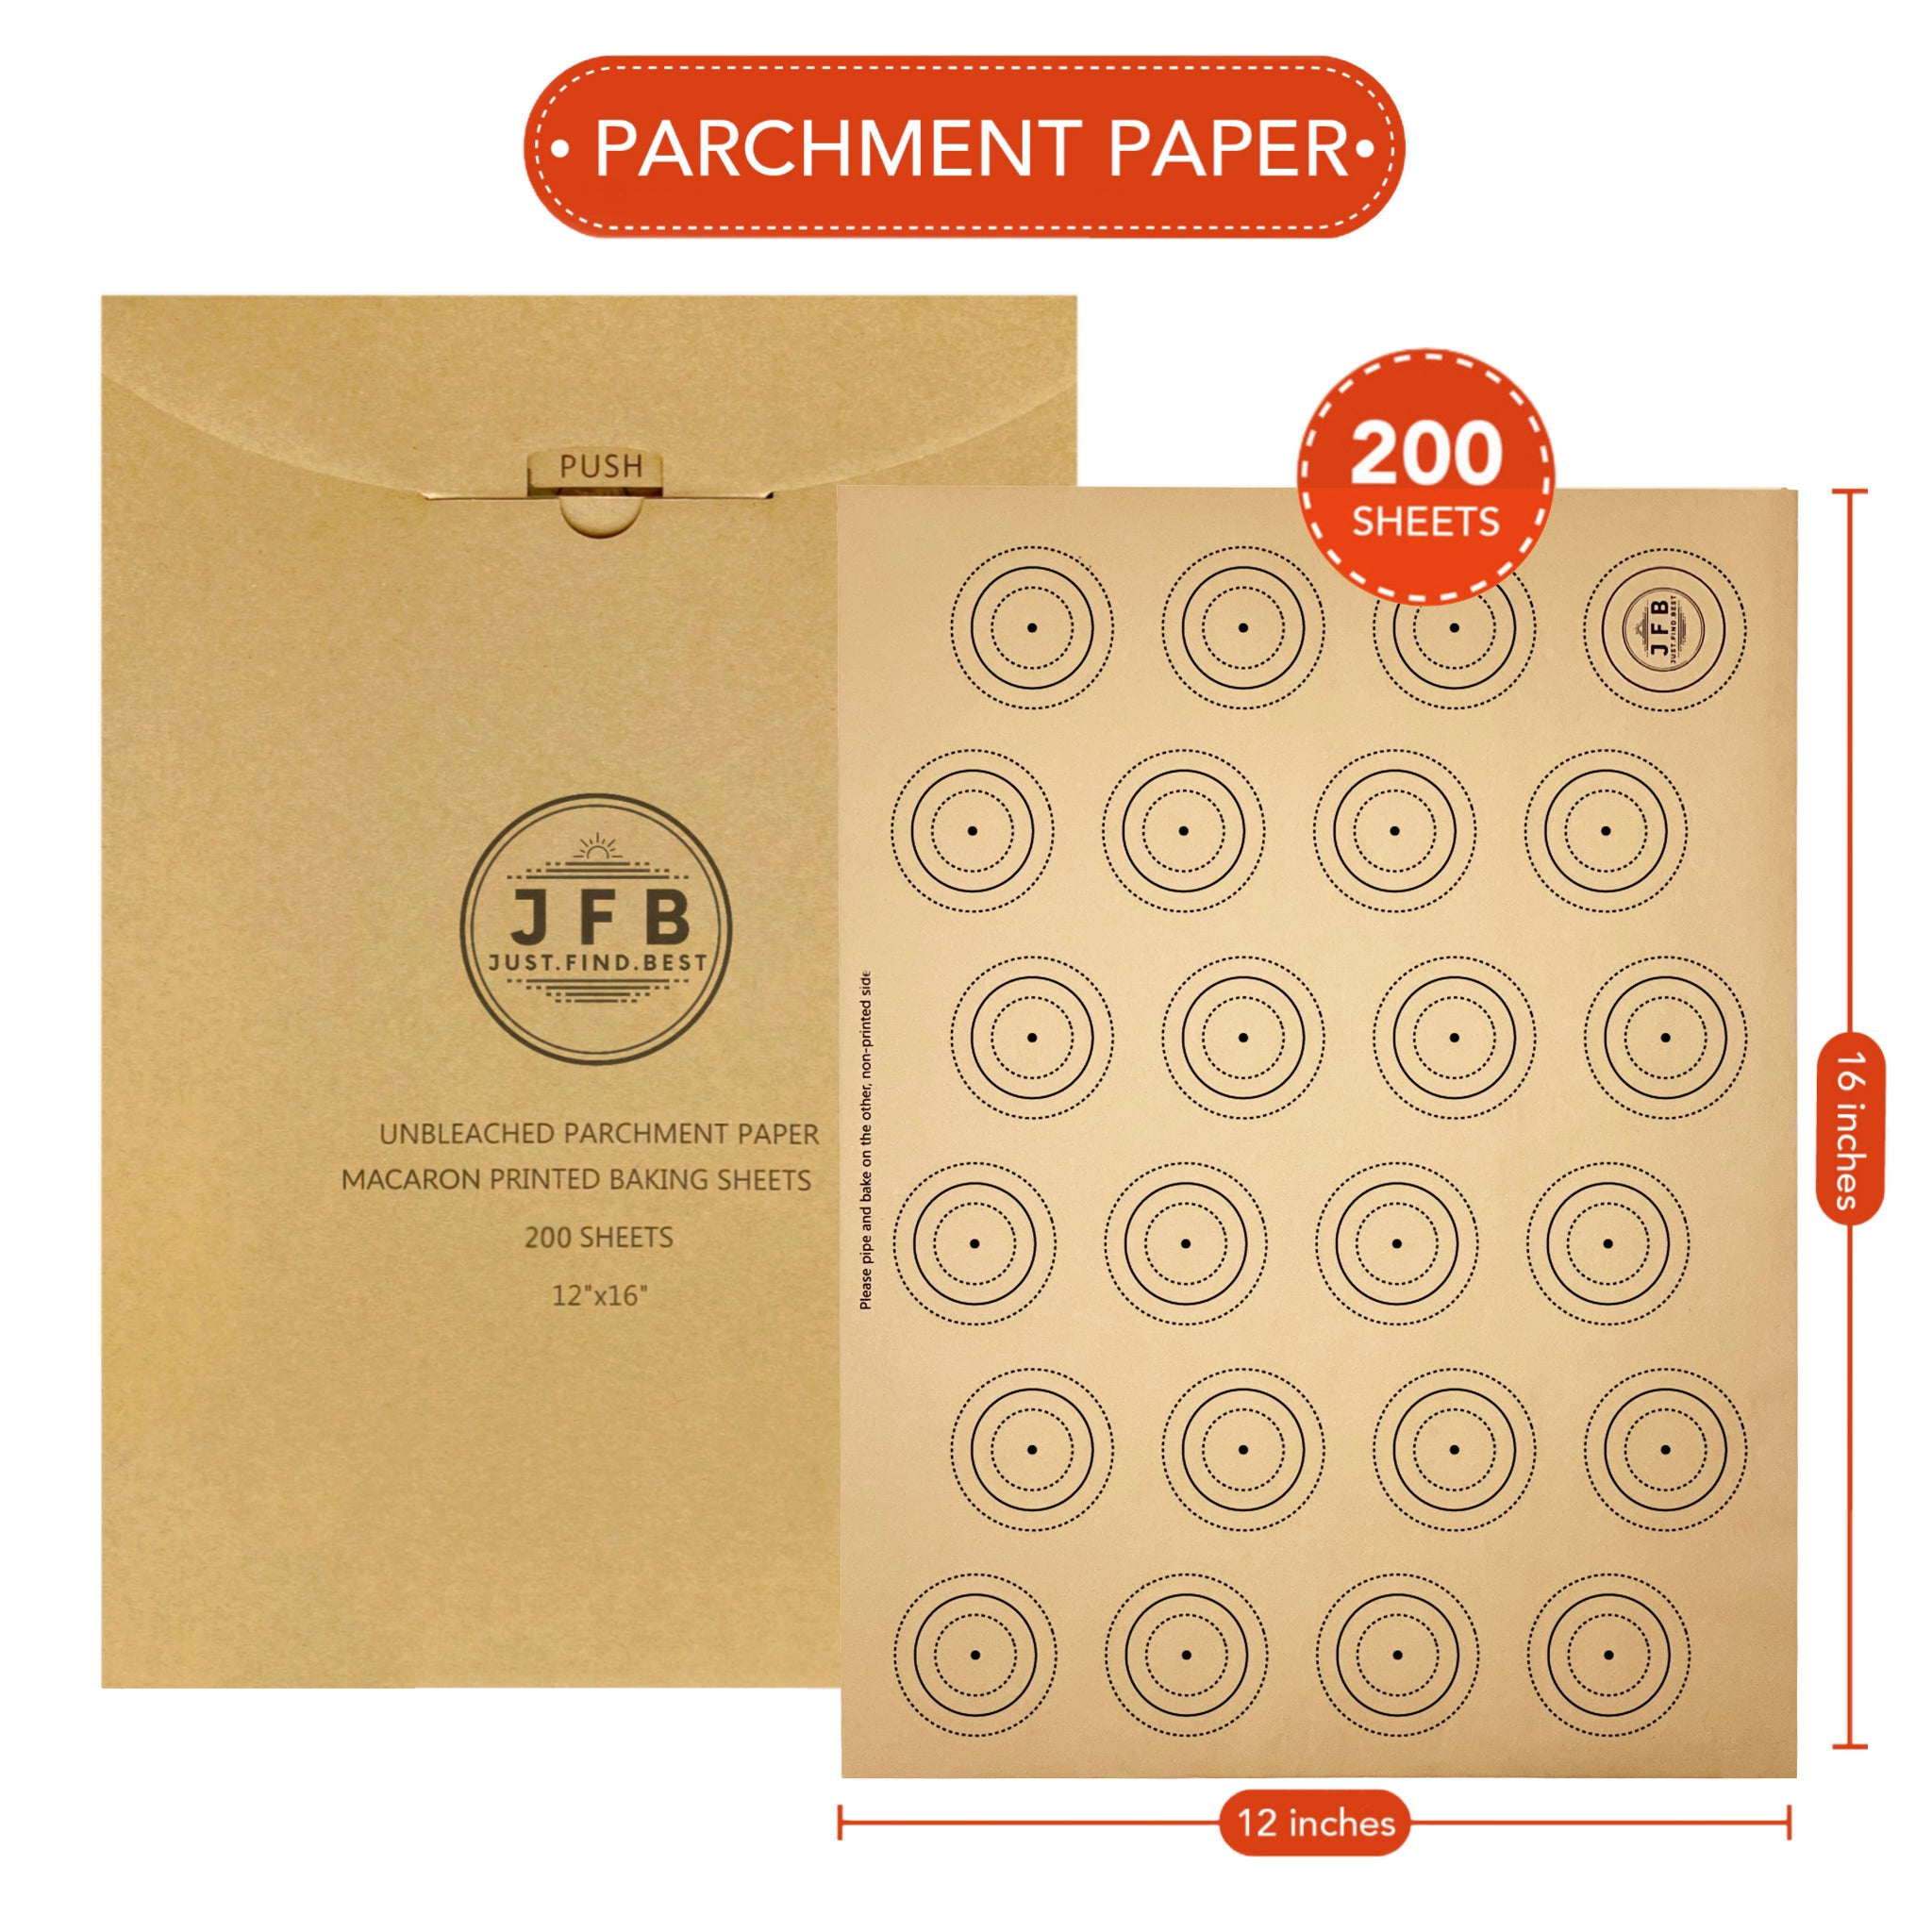  Macarons Cookie Parchment Paper Sheets Template, Pre-cut Circle  Printed Half Sheet Parchment Baking Paper sheet, Non-Stick & Easy Clean  unbleached Parchment Paper Sheets for Baking,100 Sheets: Home & Kitchen